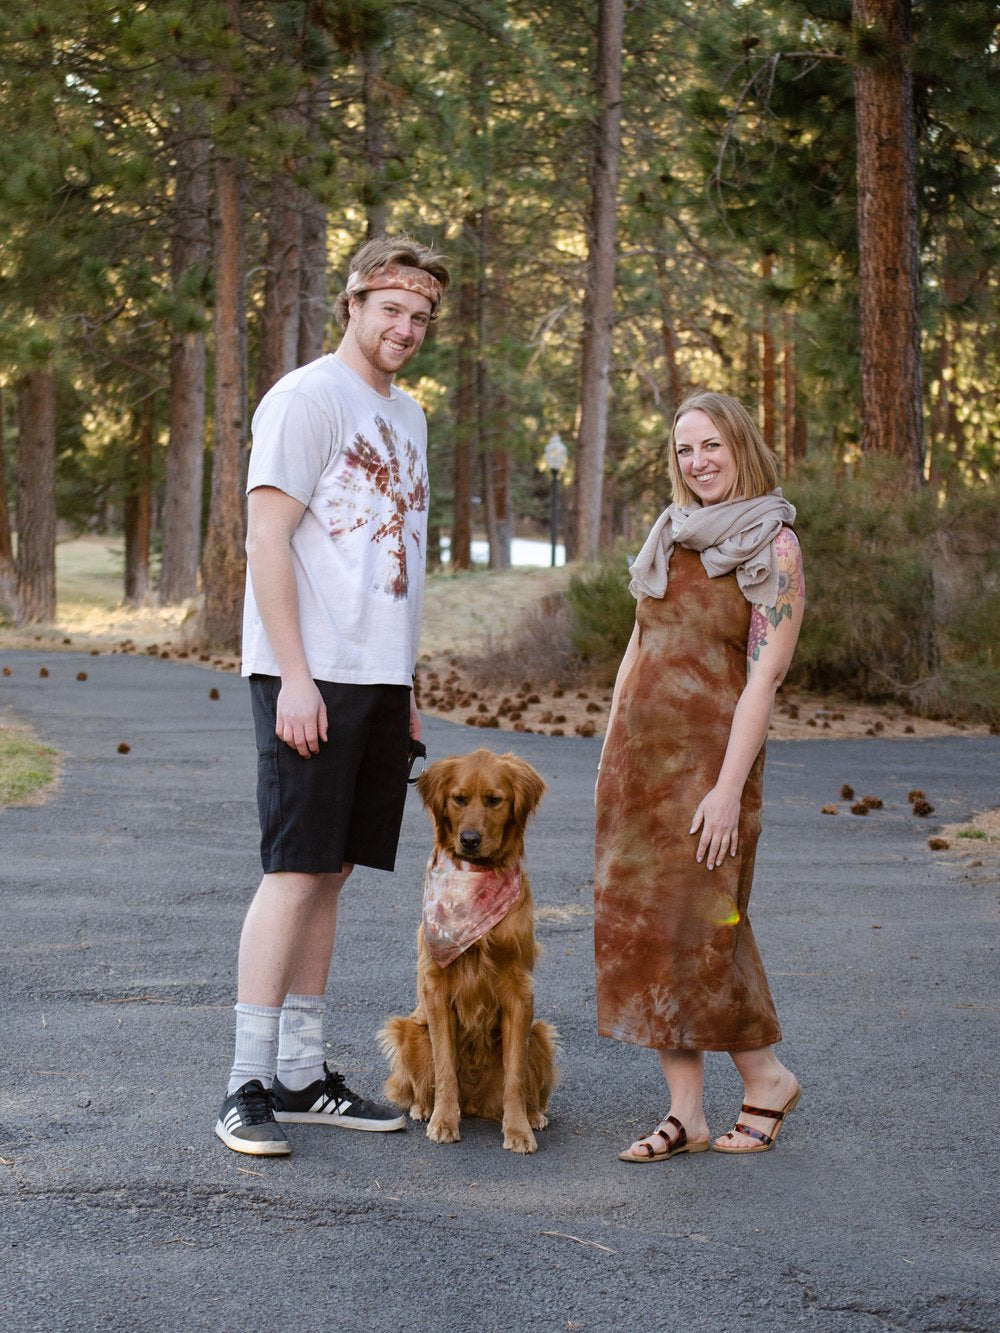 Hand-Dyed Everyday Dress in Smith Rock Colors by 1 Life - Tie Dye Dress for Camping, Shopping, and More